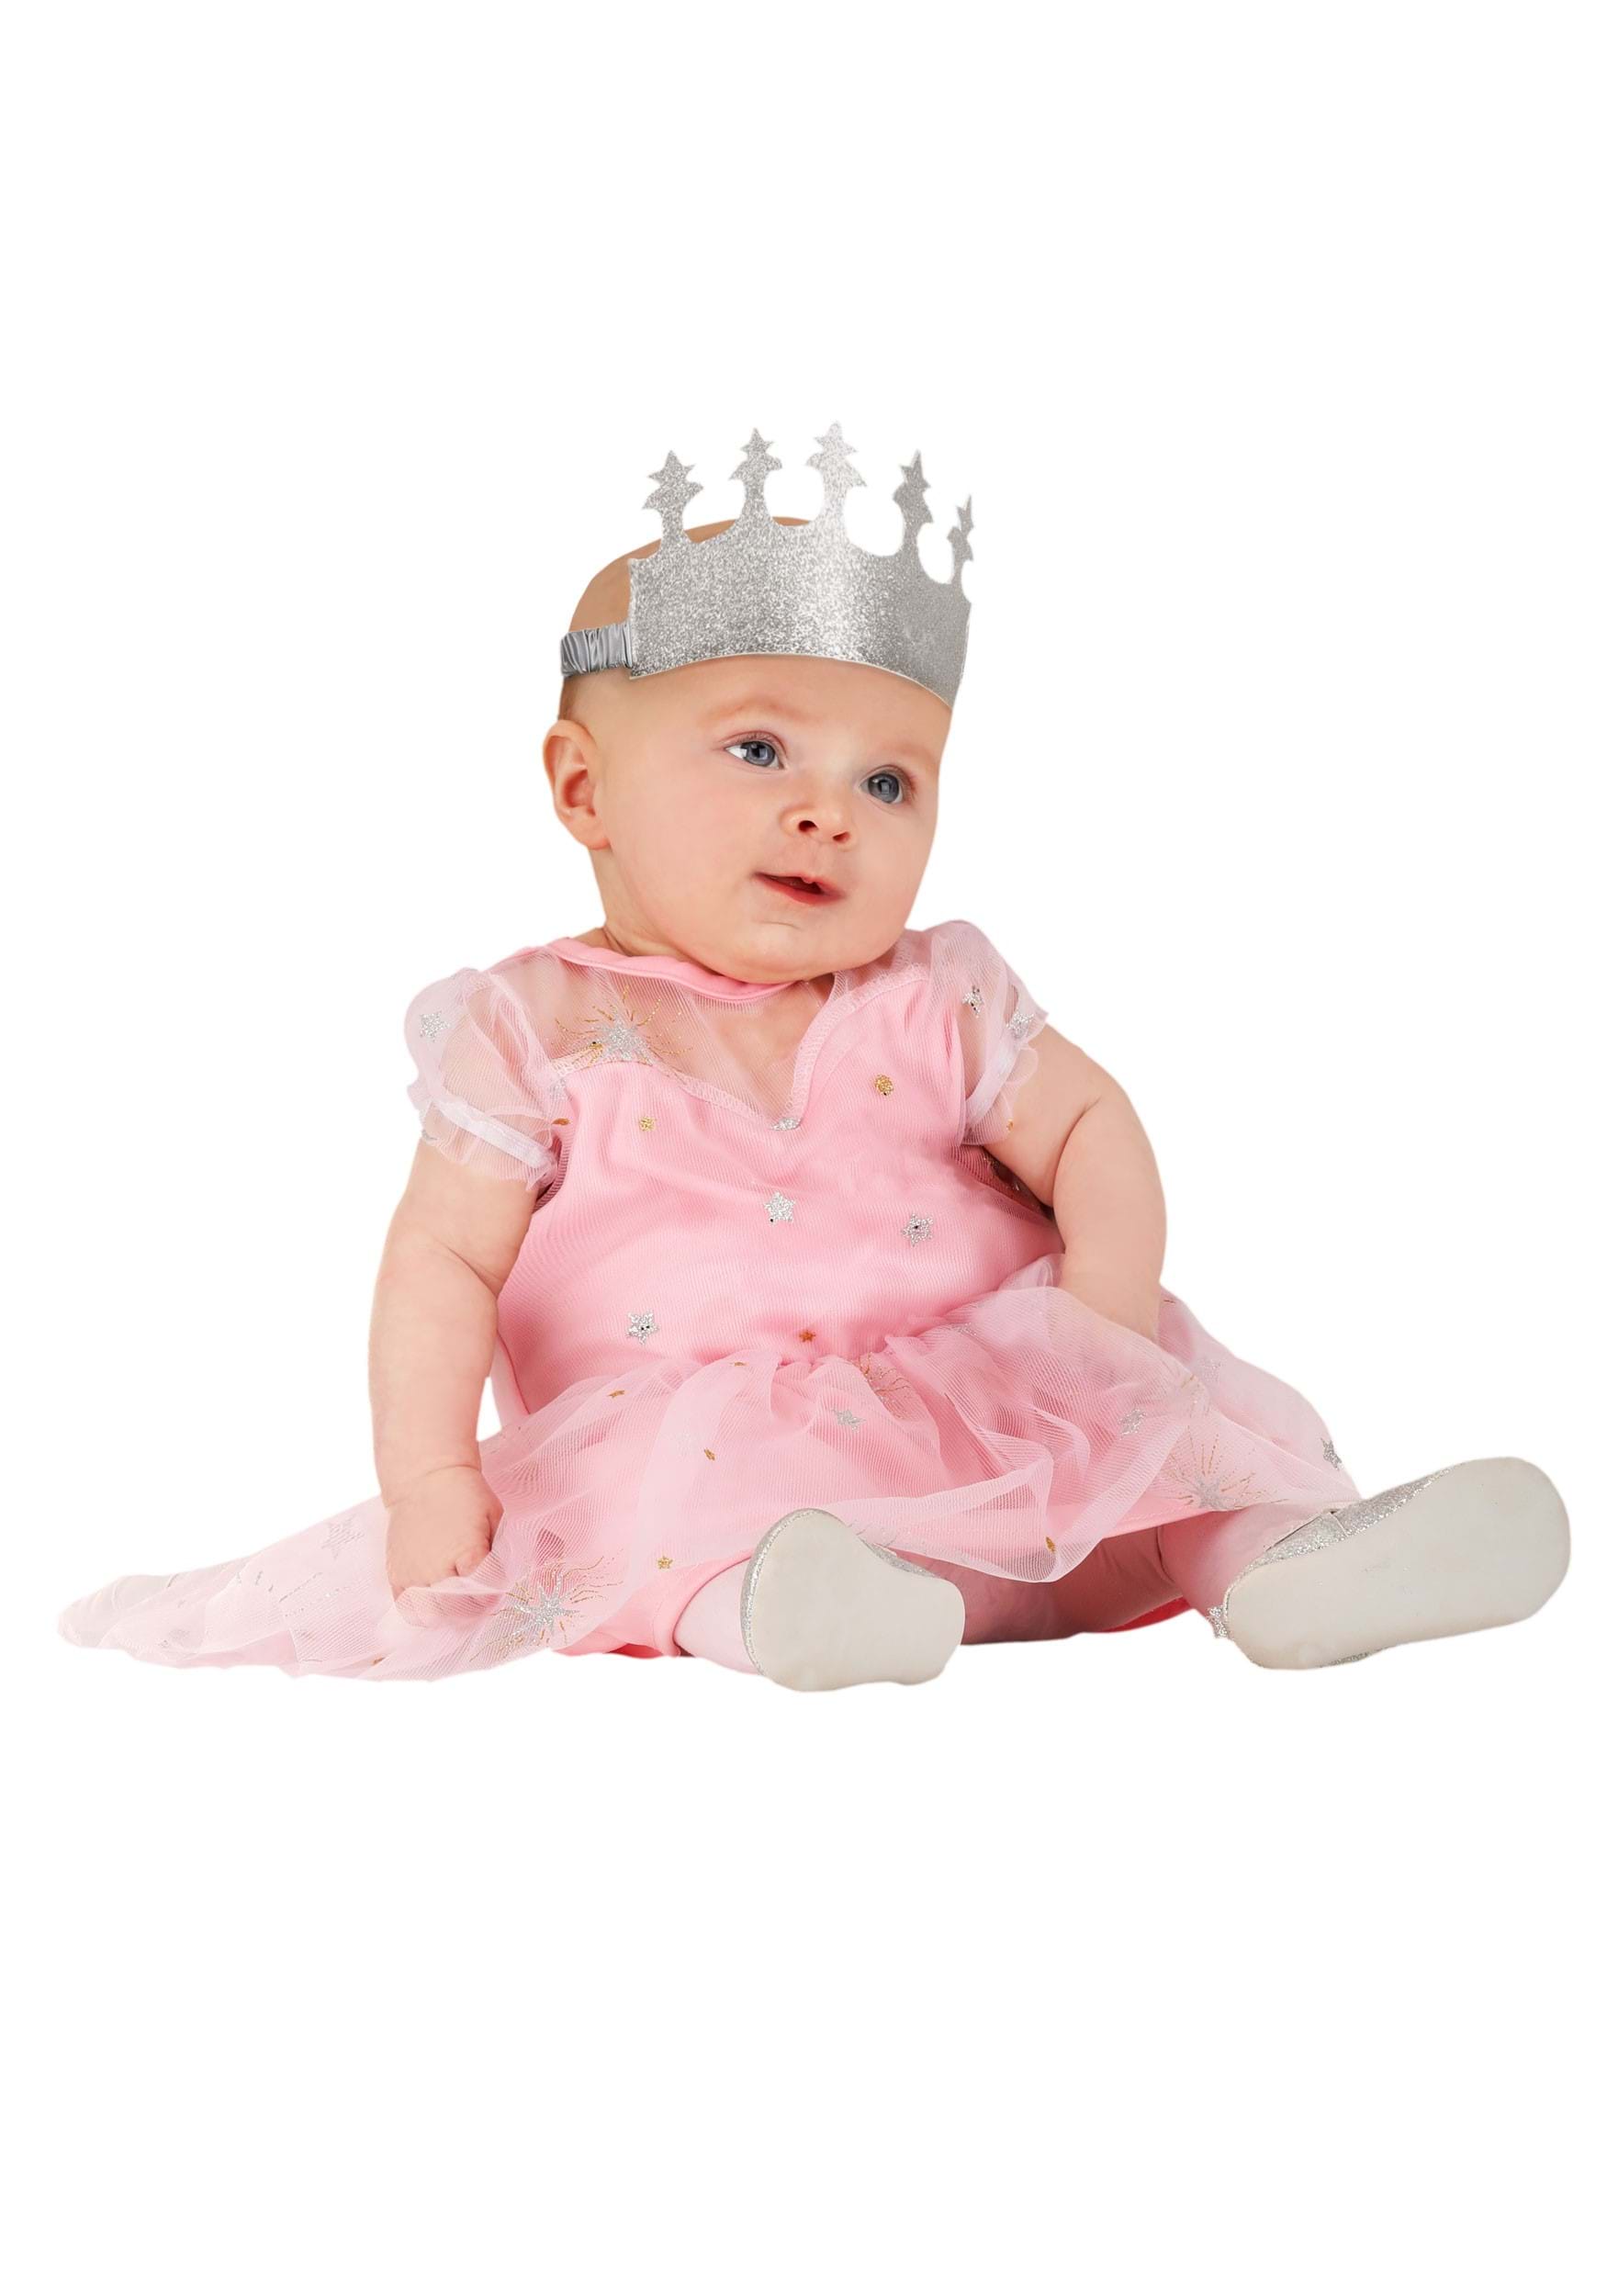 Wizard of Oz Infant Glinda the Good Costume | Baby Costumes